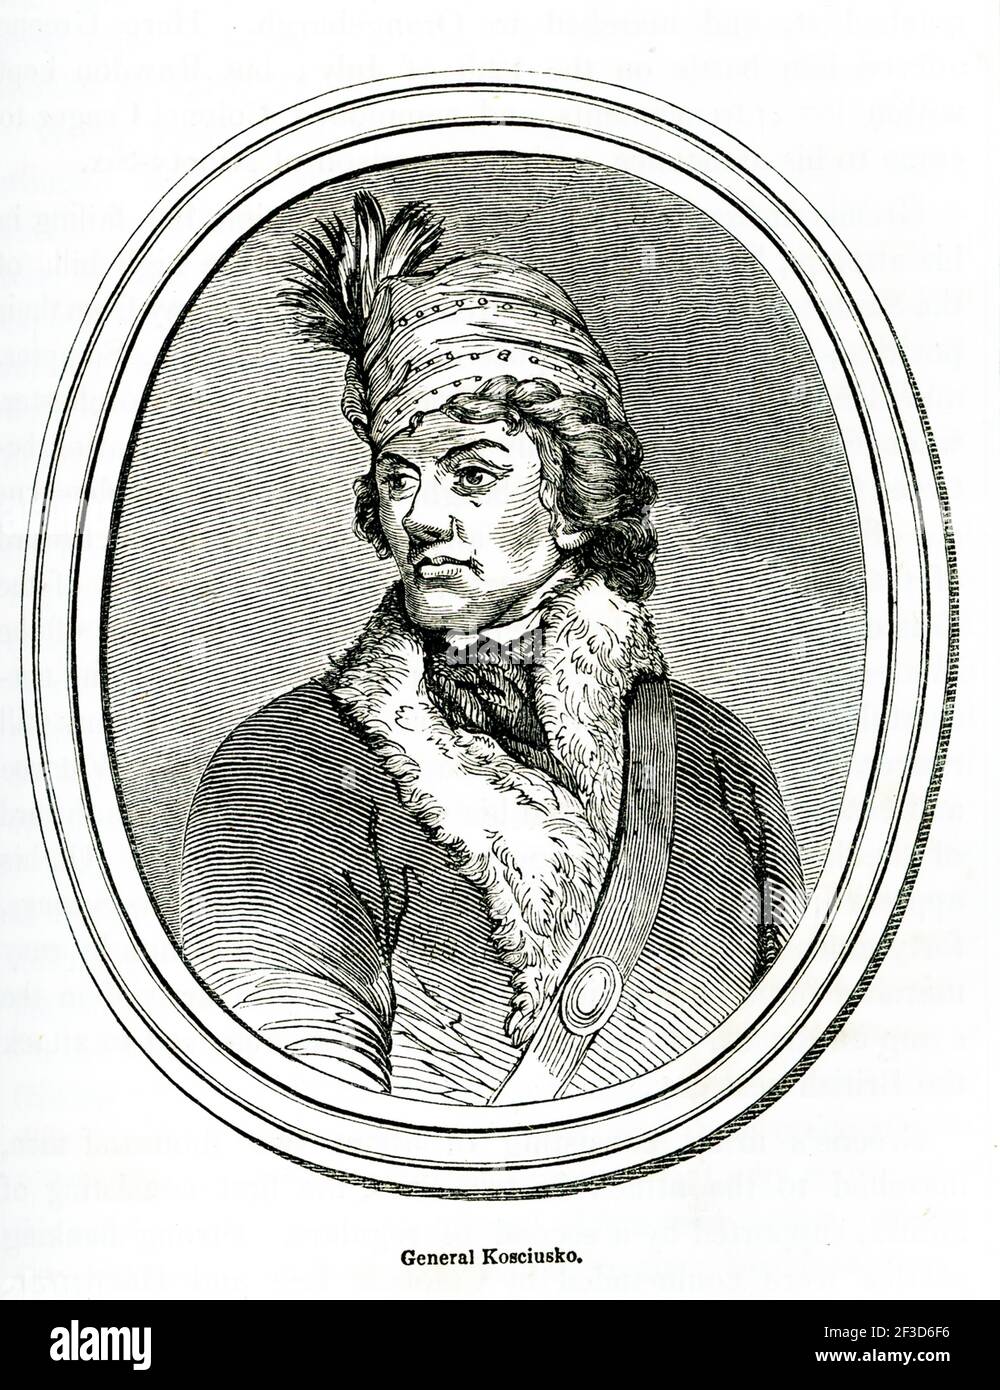 This 1840s illustration shows General Kosciusko. Tadeusz Kosciuszko, English Thaddeus Kosciusko, Polish in full Tadeusz Andrzej Bonawentura Kosciuszko (1746-1817) was a Polish army officer and statesman who gained fame both for his role in the American Revolution and for his leadership of a national insurrection in his homeland. Stock Photo